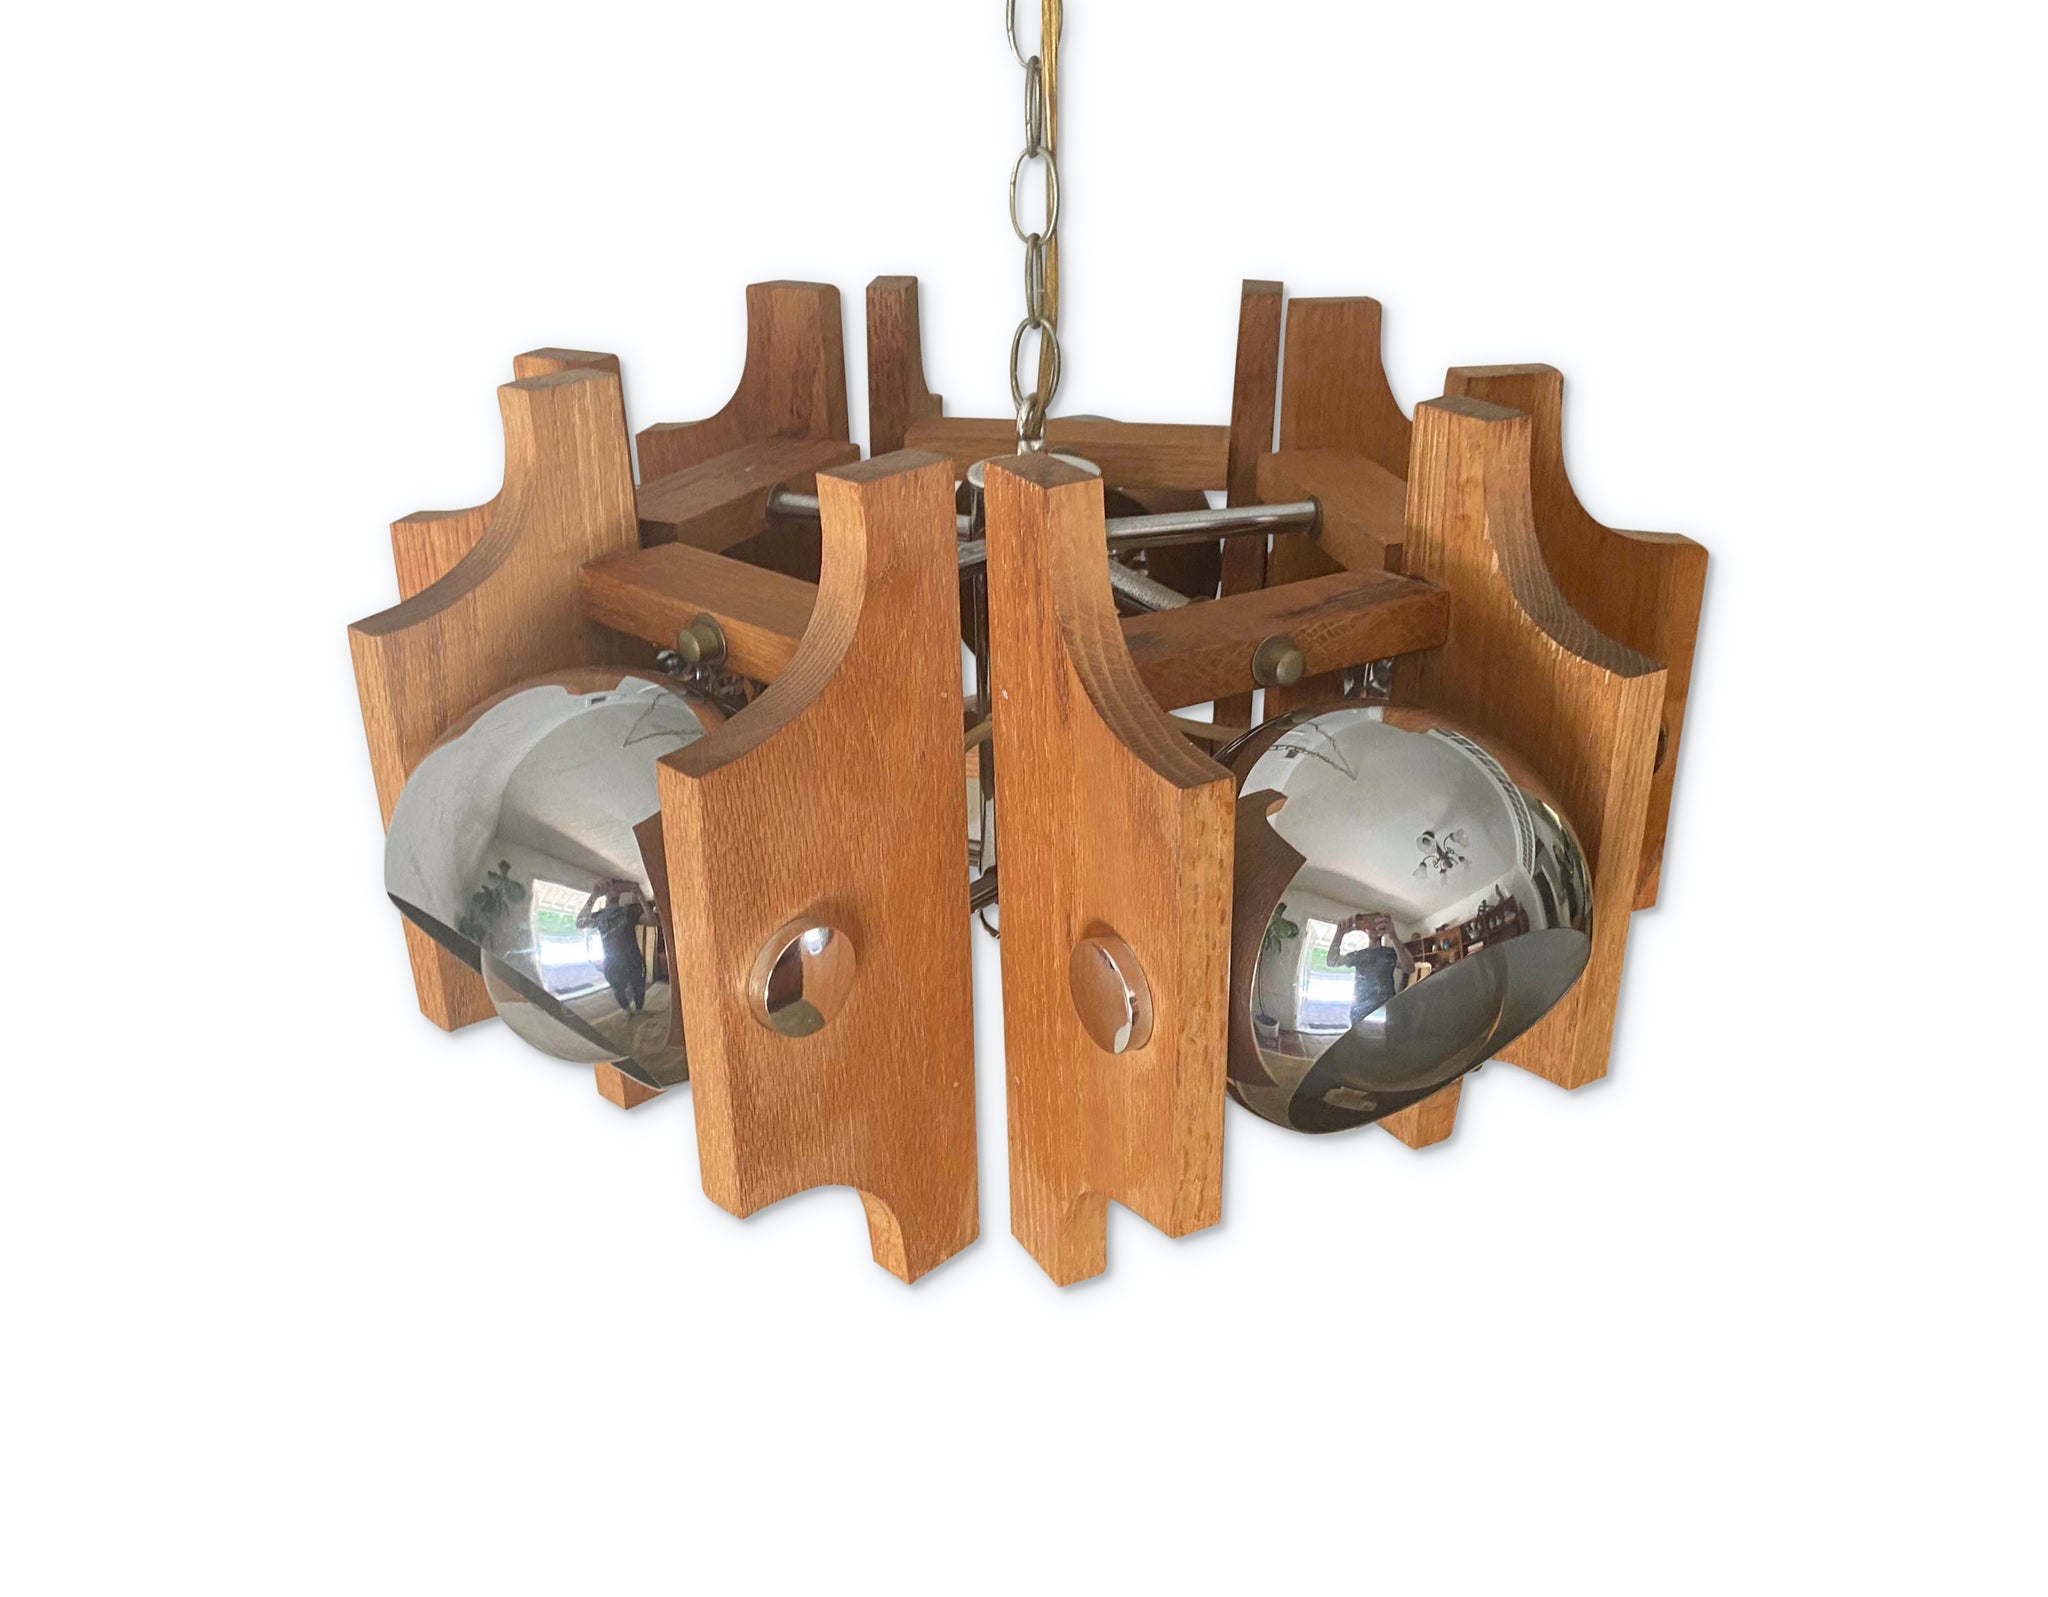 VINTAGE 1970S WOOOD AND CHROME ATOMIC CHANDELIER HANGING PENDANT CEILING LIGHT